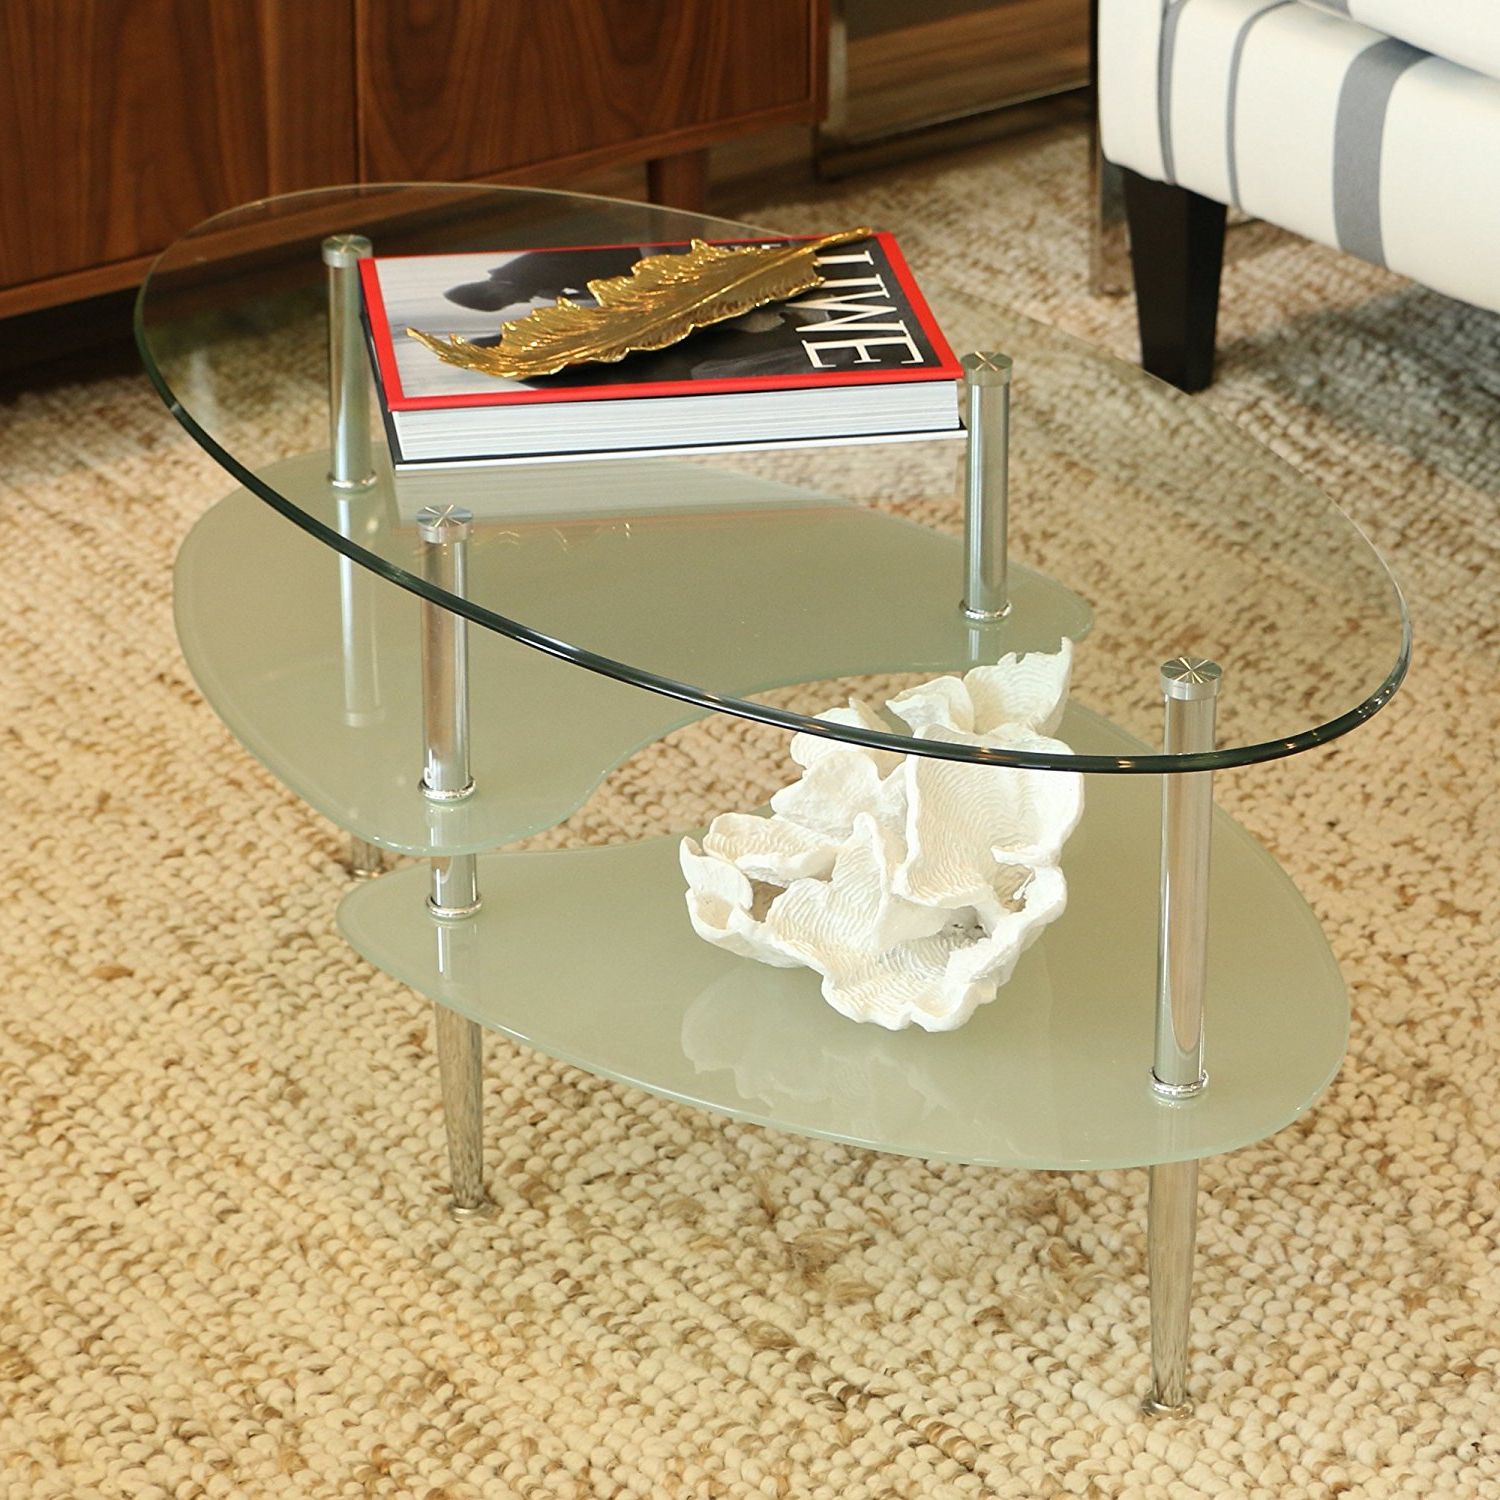 Most Popular 14 3 Tier Glass Coffee Table Pics Inside 3 Tier Coffee Tables (View 1 of 20)